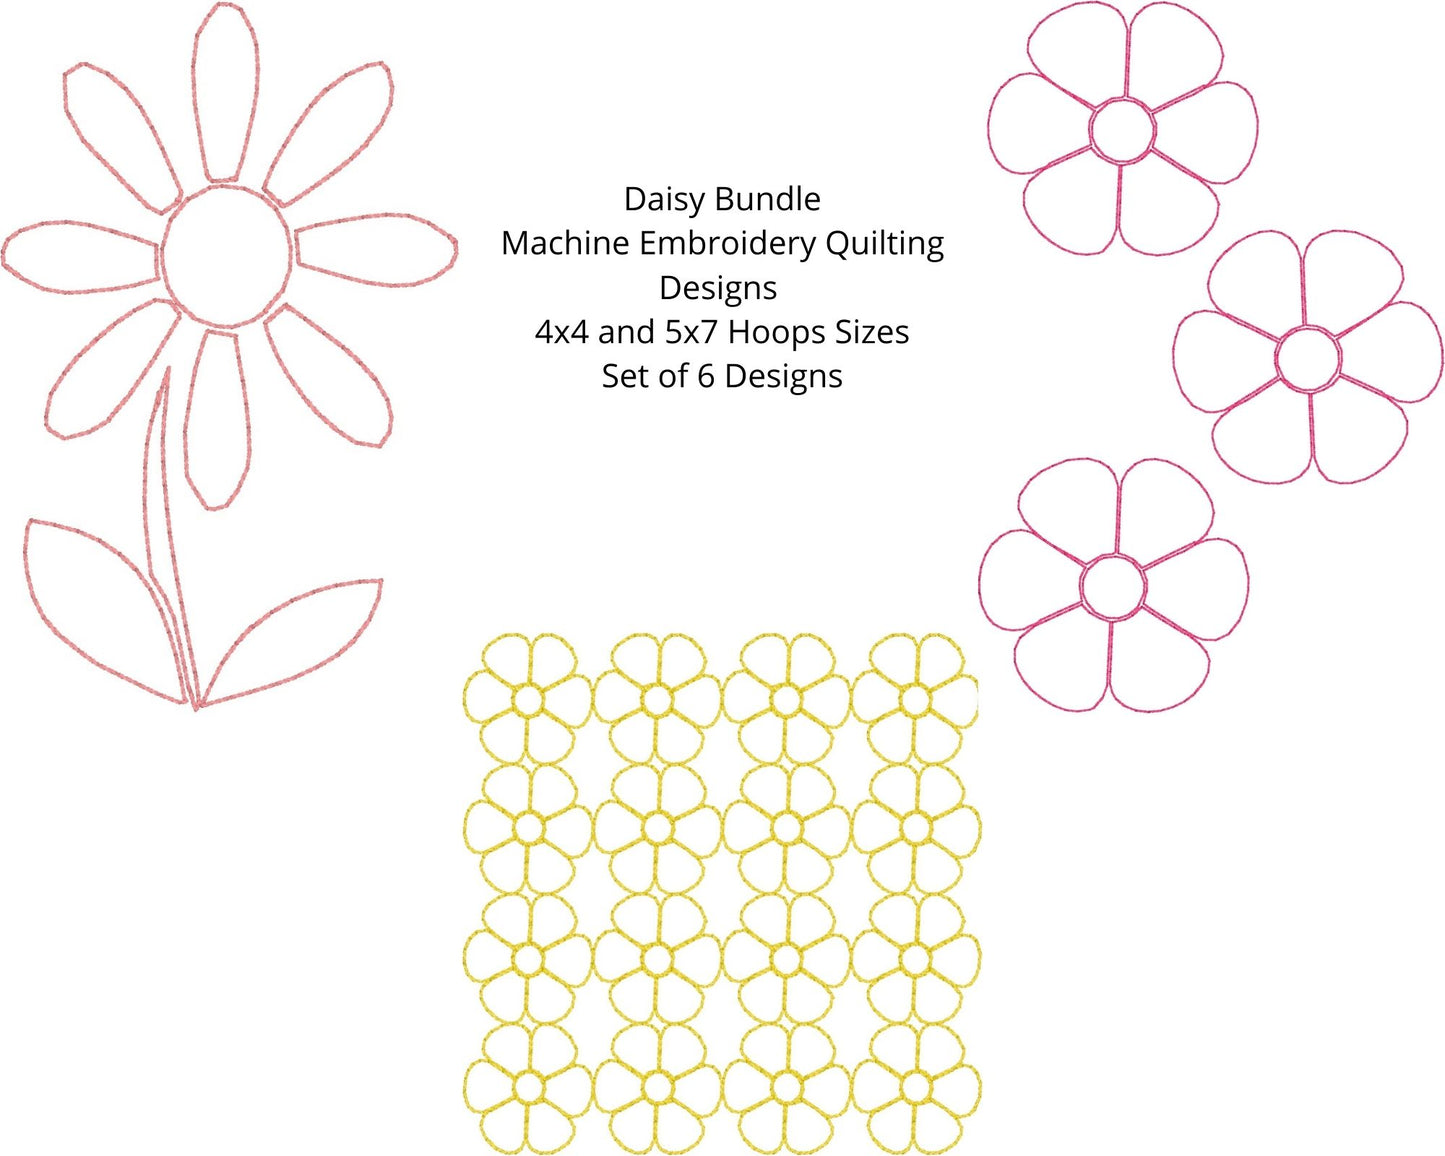 Daisy Bundle - 3 Designs - 2 Sizes - Machine Embroidery Quilting Design - Beachside Knits N Quilts